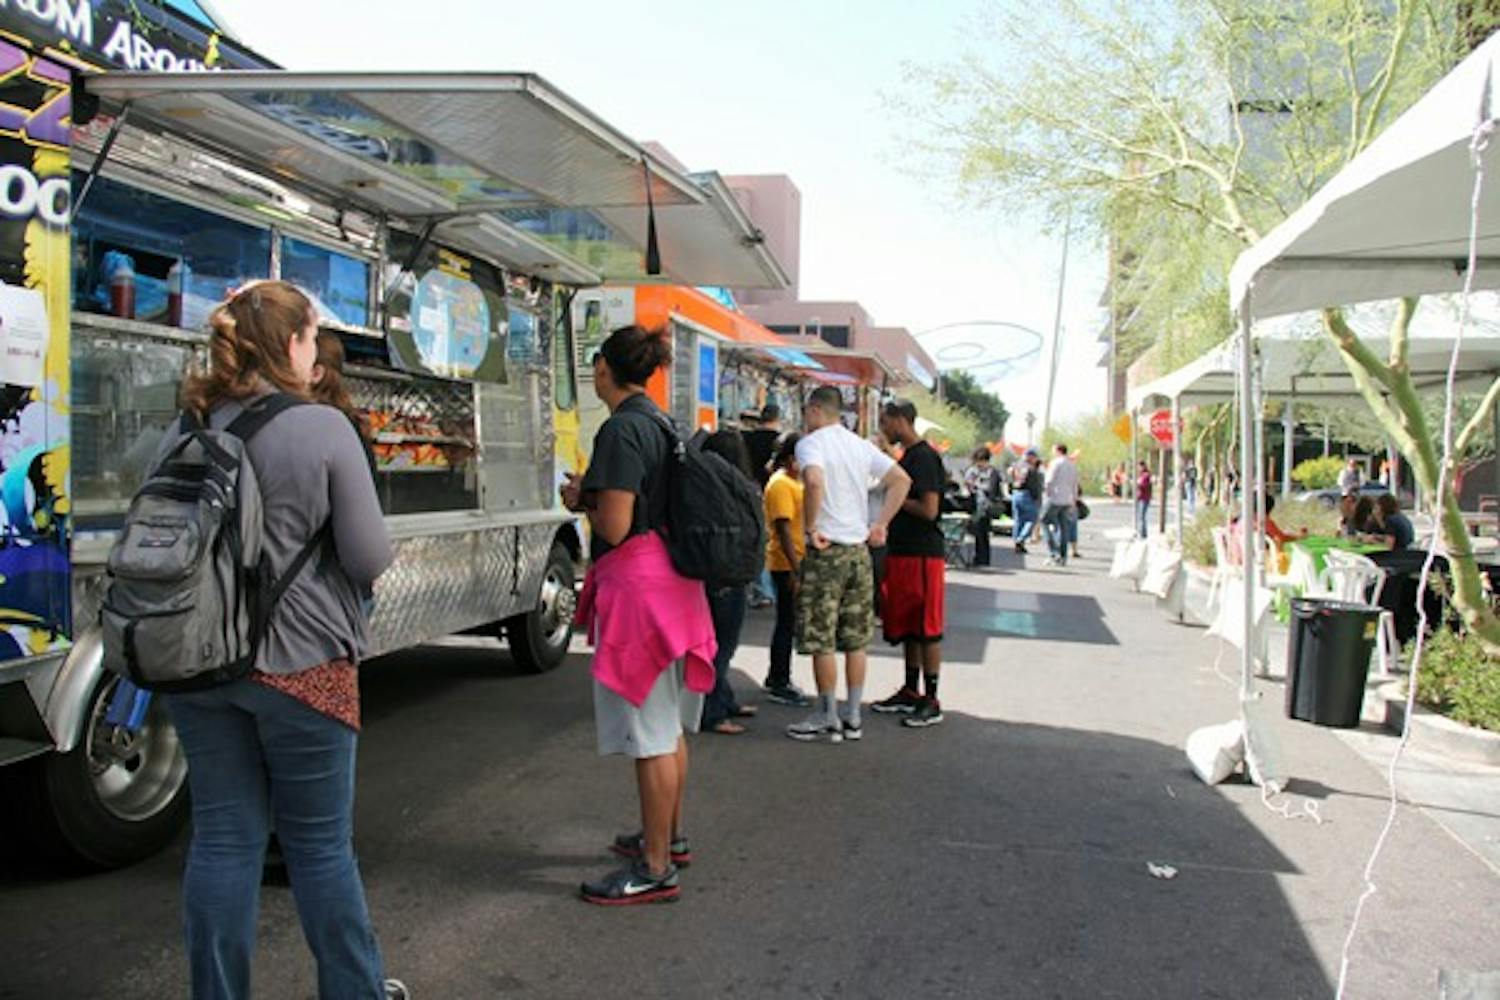 ASU students buy Mexican, barbecue and other types of food from food trucks on Taylor Street Monday afternoon. (Photo by Diana Lustig)